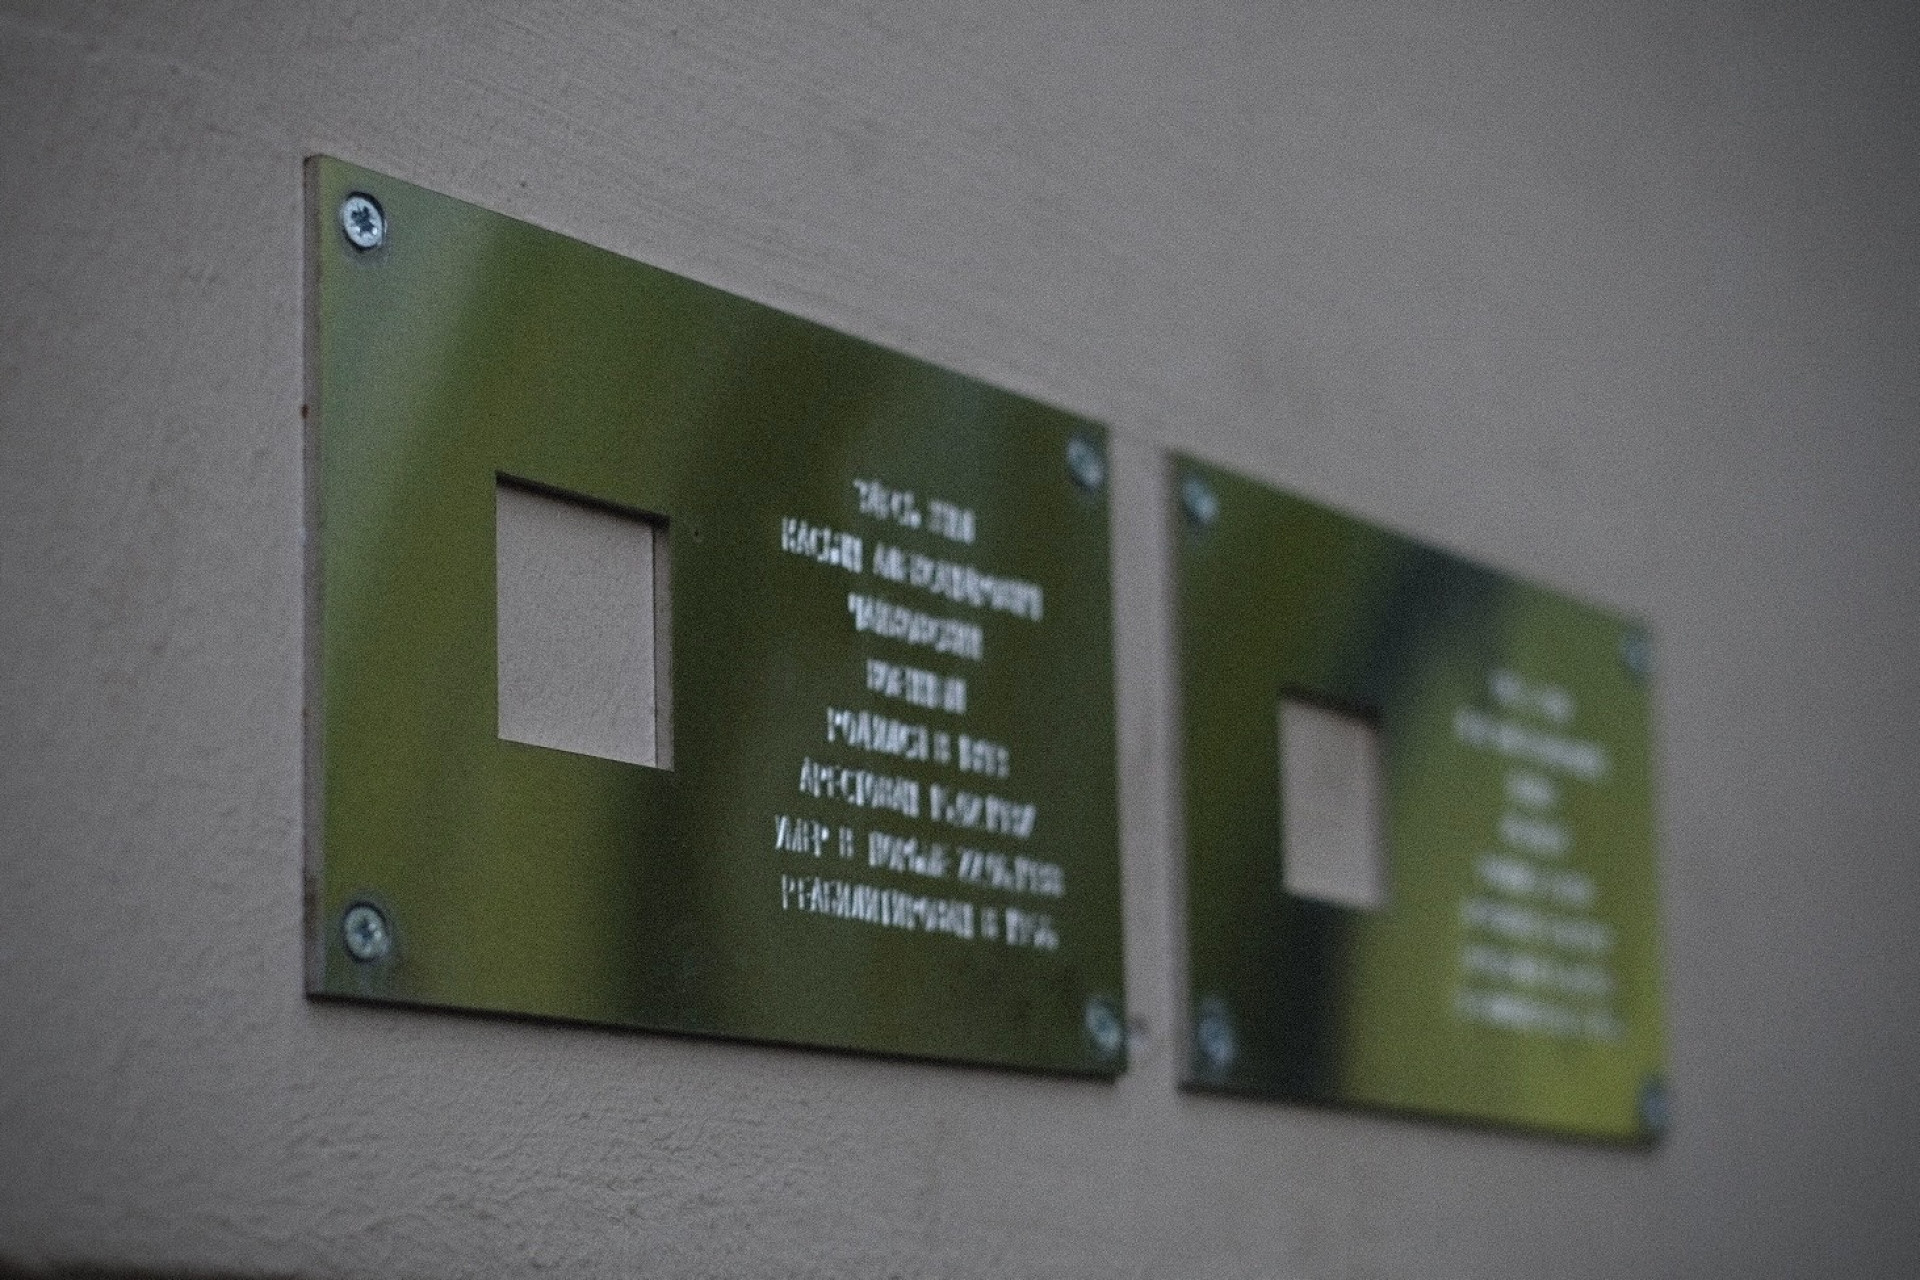 ‘One Name, One Life, One Plaque&: Russian Project Installs Reminders of Soviet Repressions